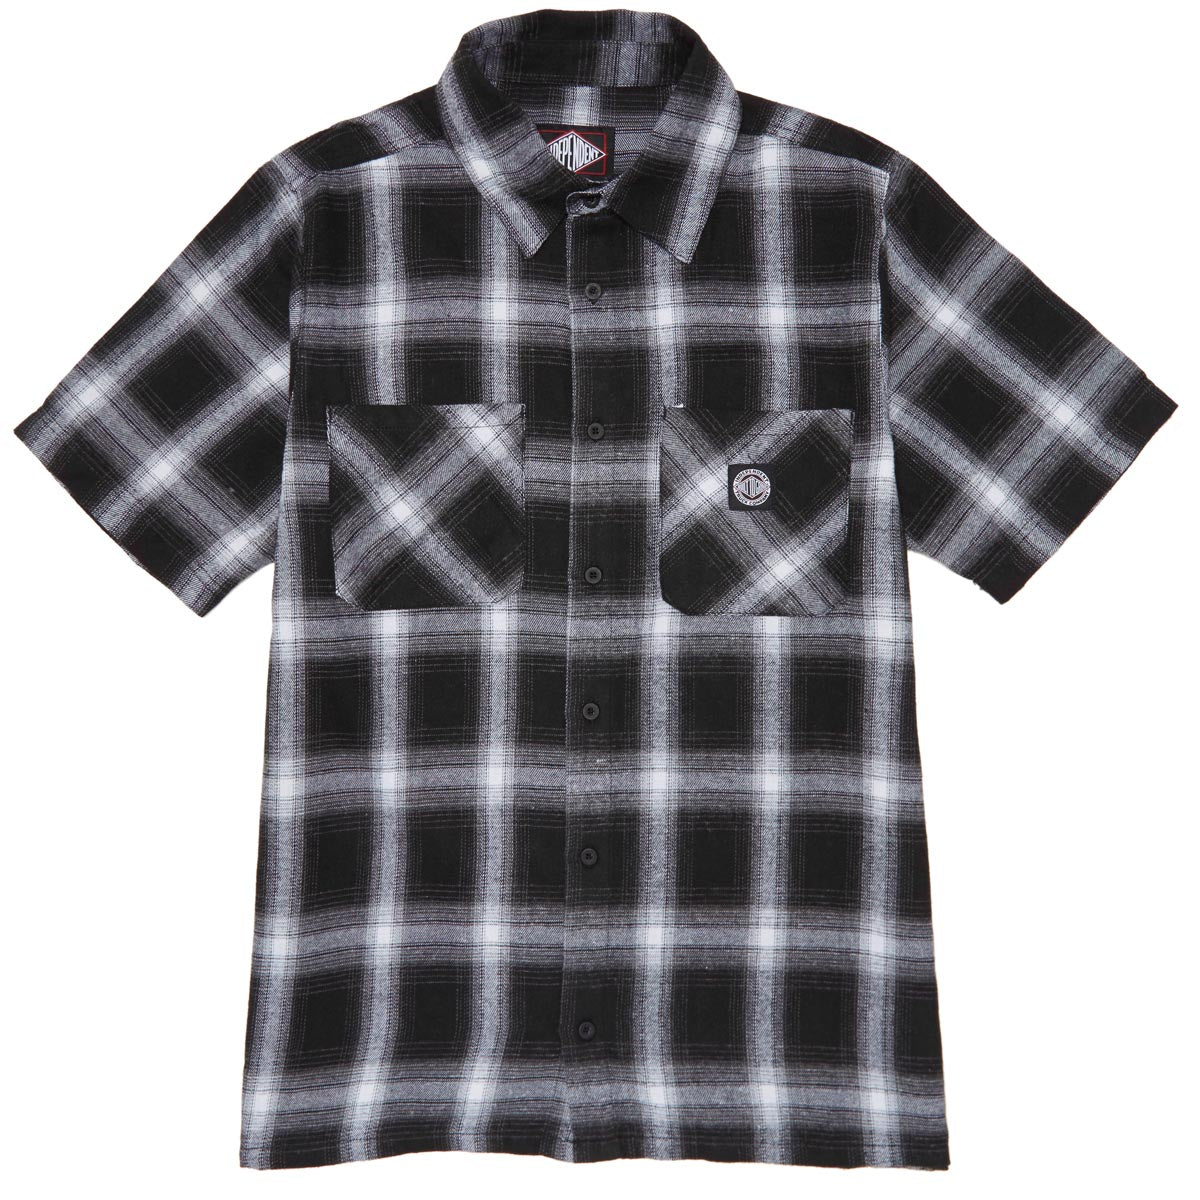 Independent Uncle Charlie Flannel Shirt - Black/White image 1